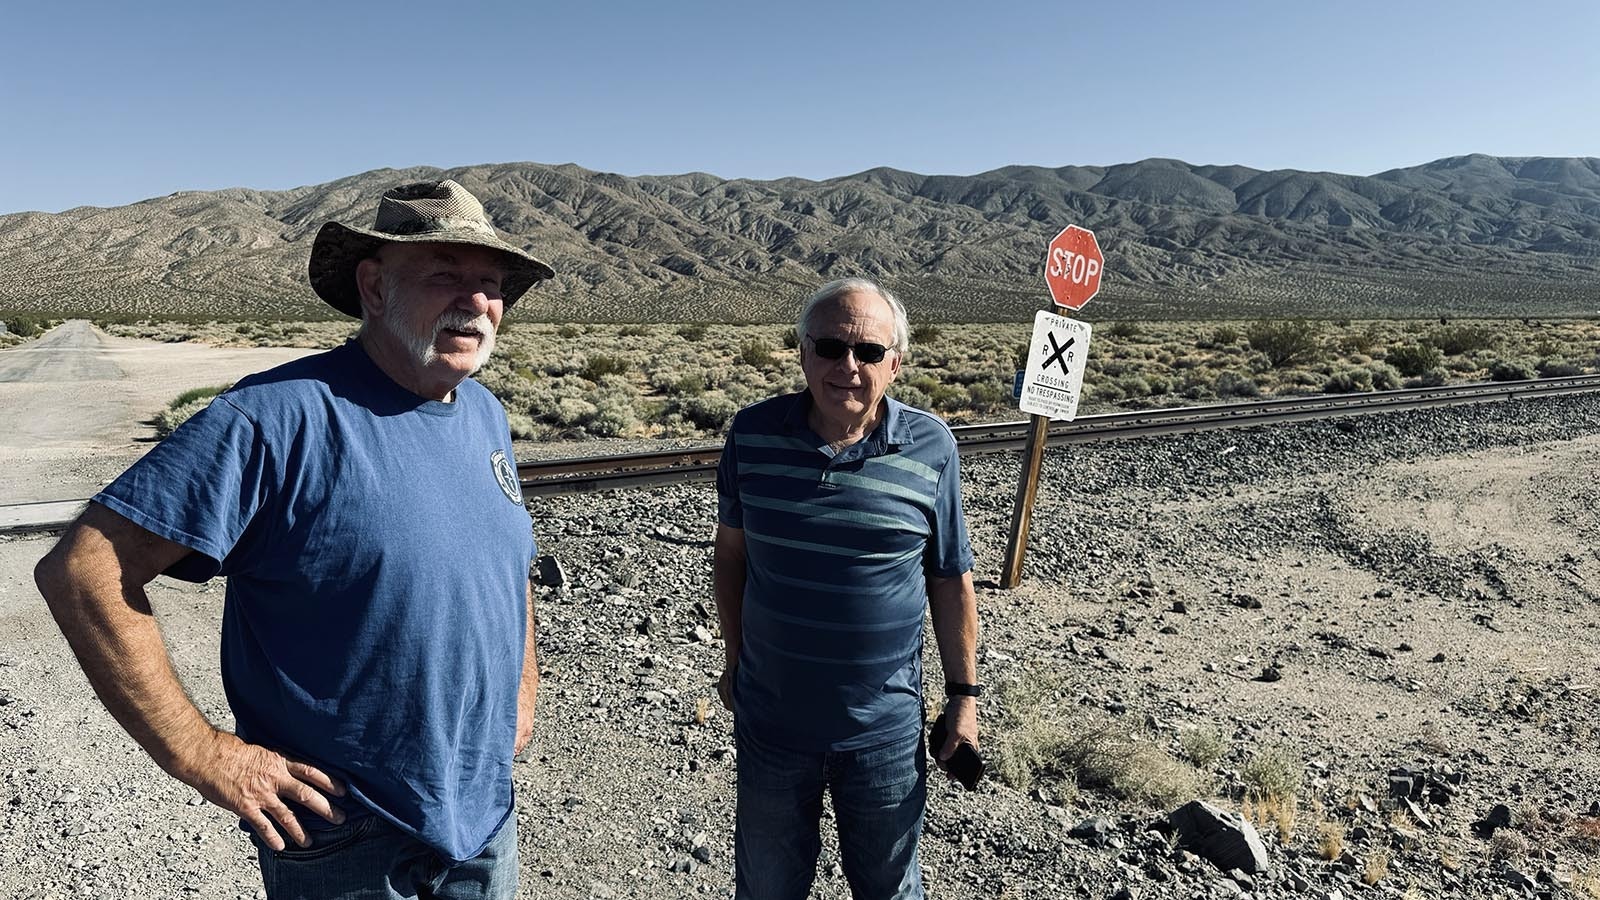 On left, Gregg Wilkerson and Larry Vredenburgh, geologists who have retired from the Bureau of Land Management, have written extensively on Saltdale and mining operations in the reigon. They were surprised to find out Dyno Nobel was storing ammonium nitrate in hopper cars in the Mojave Desert instead of a salt mining extraction operation that may have restarted.